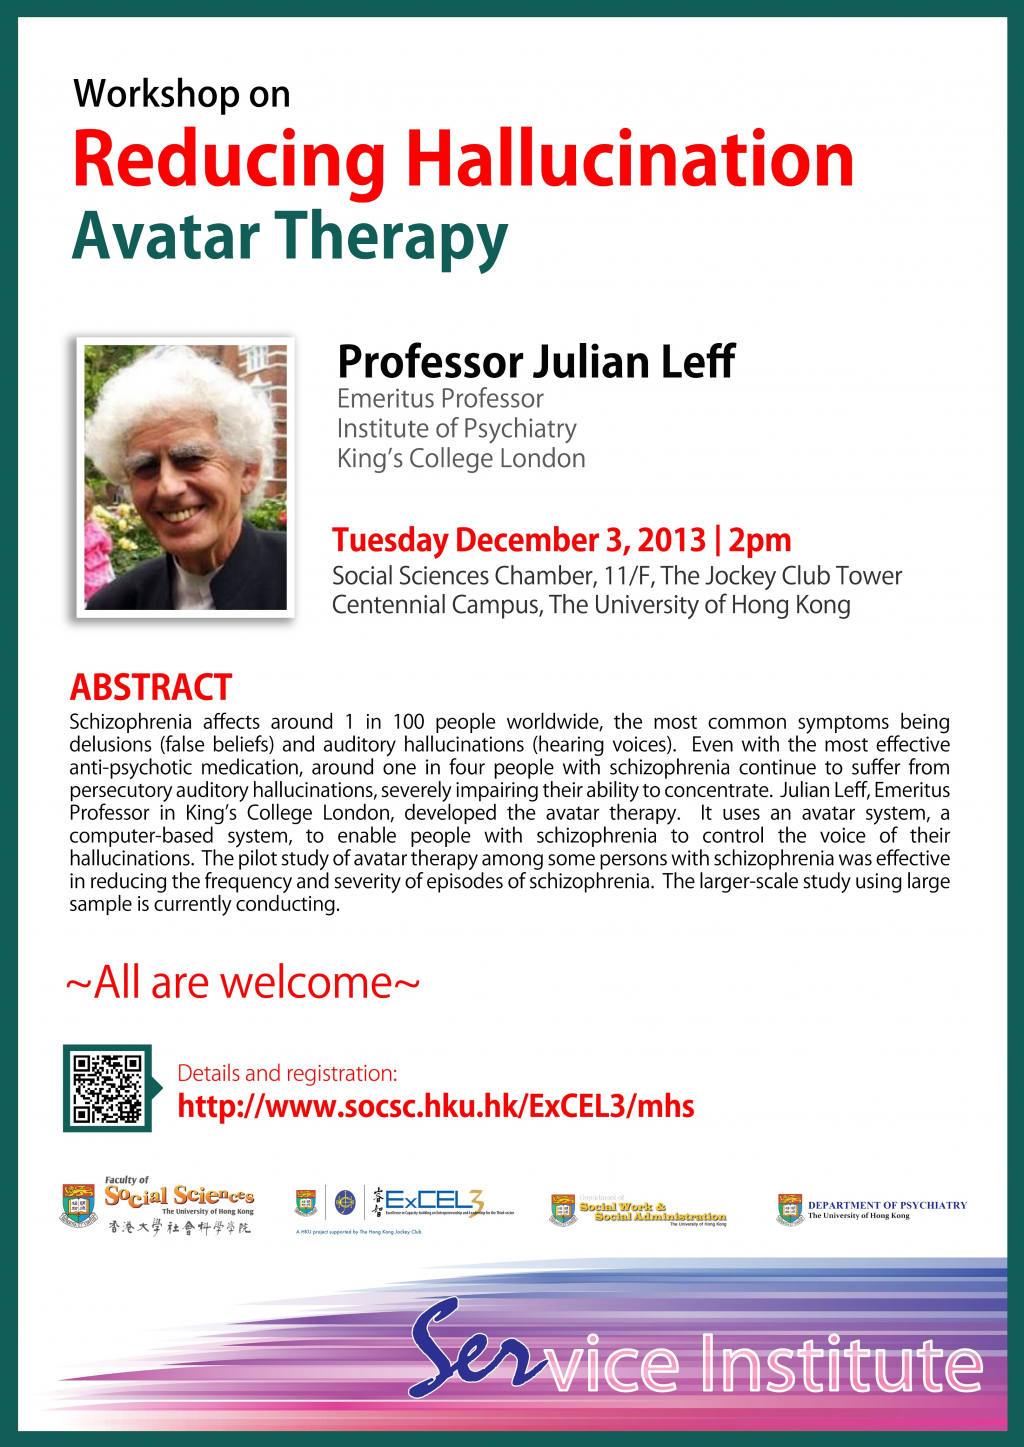 Workshop on Reducing Hallucination: Avatar Therapy